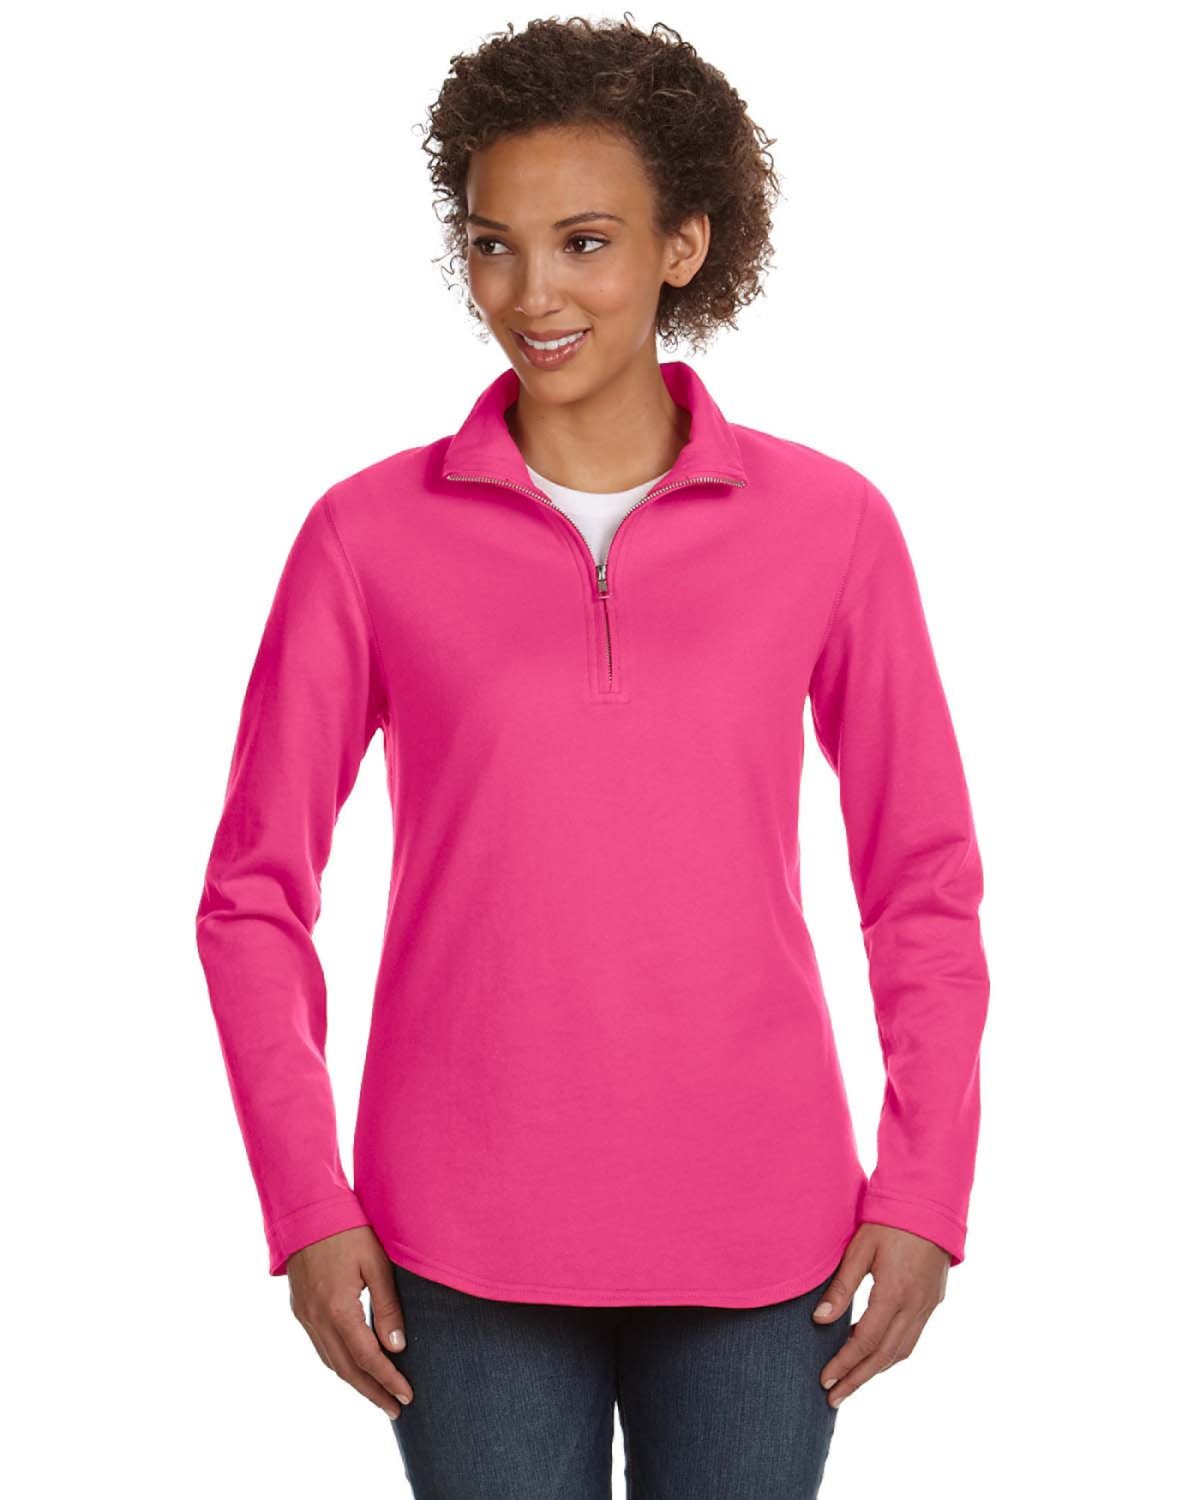 LAT Ladies' French Terry 1/4-Zip Pullover